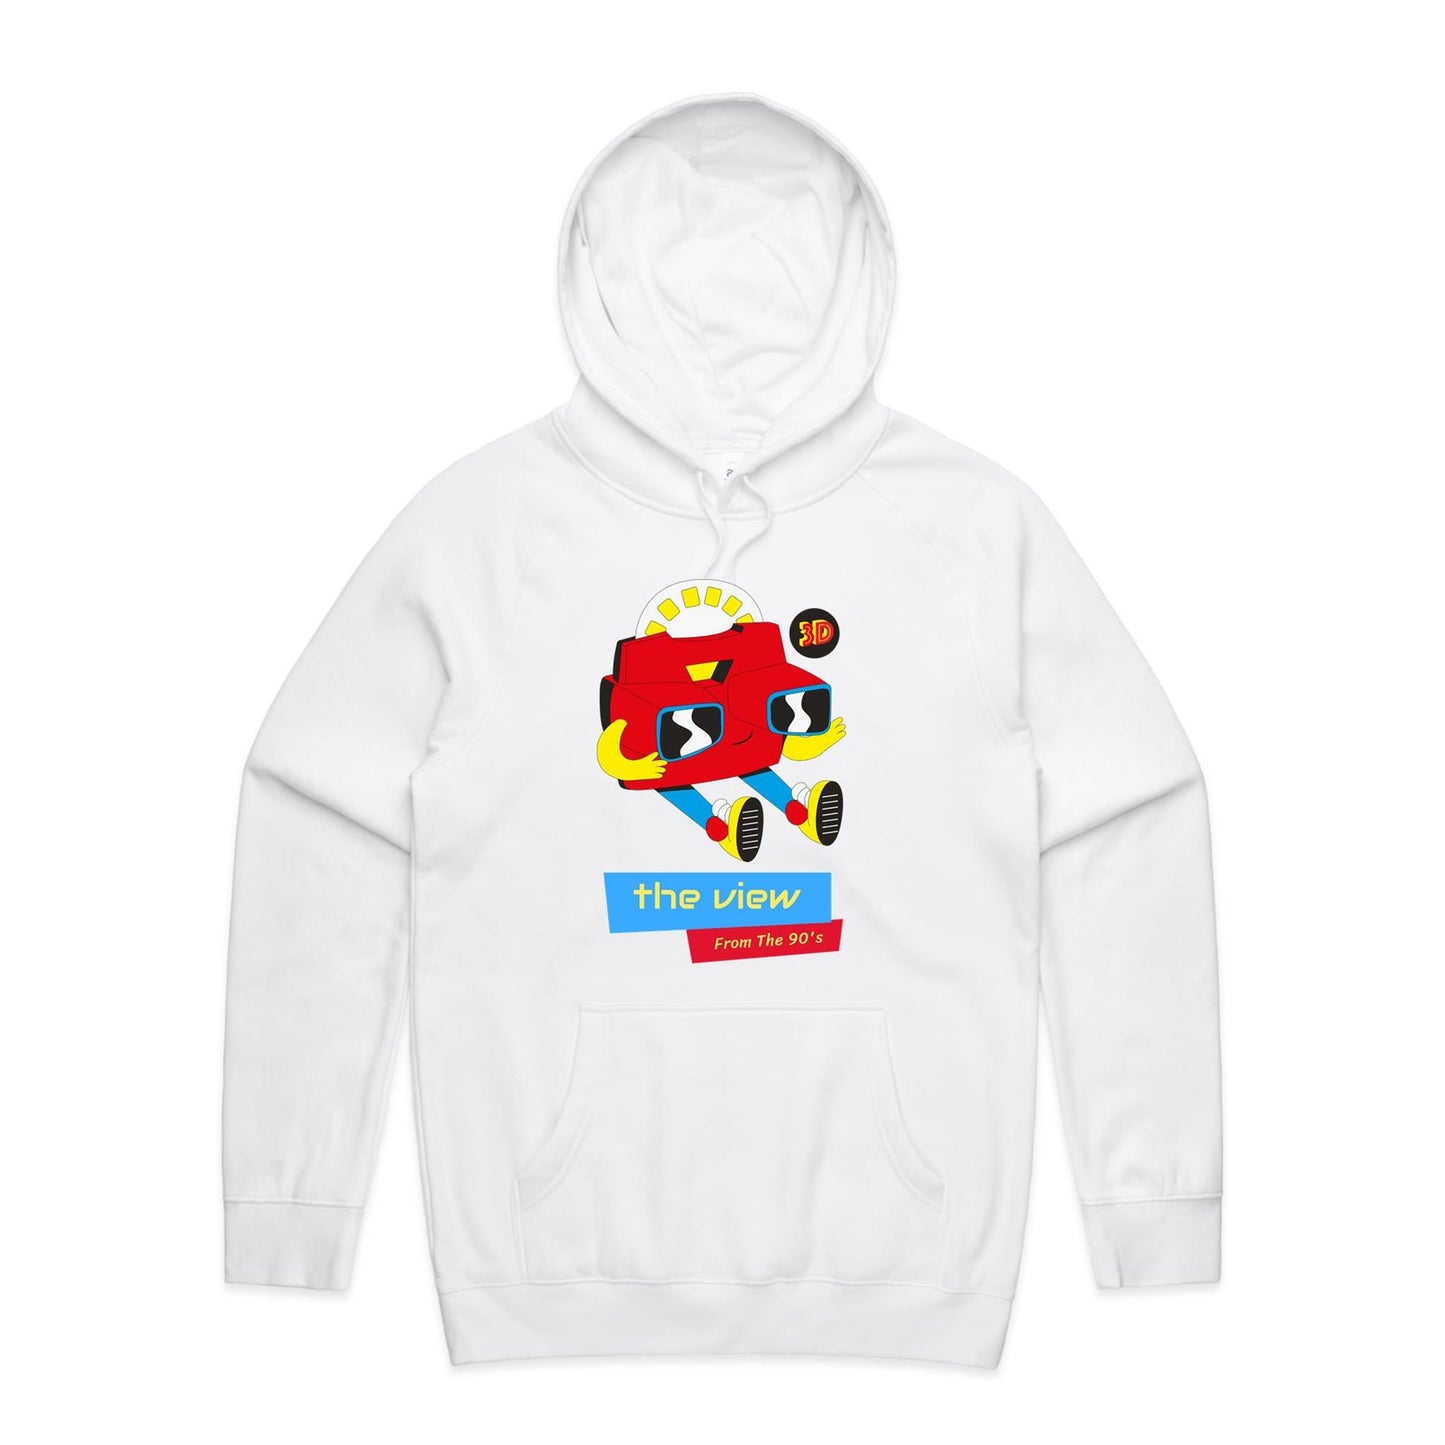 The View From The 90's - Supply Hood White Mens Supply Hoodie Retro